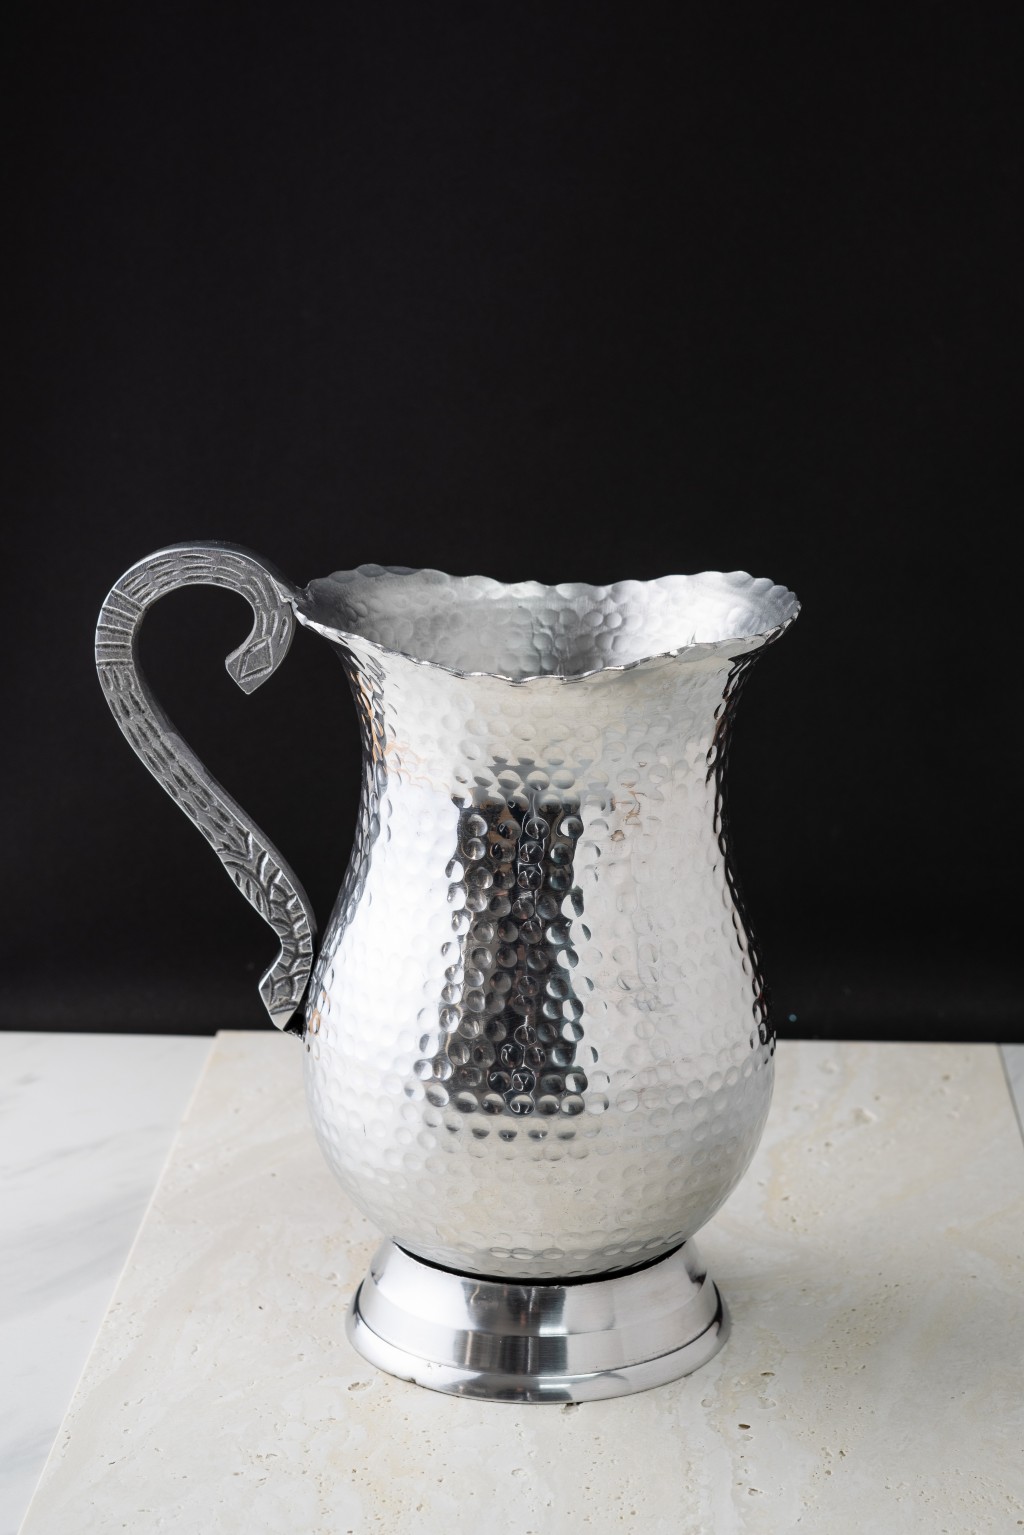 Hand Hammered Stainless Steel Pitcher